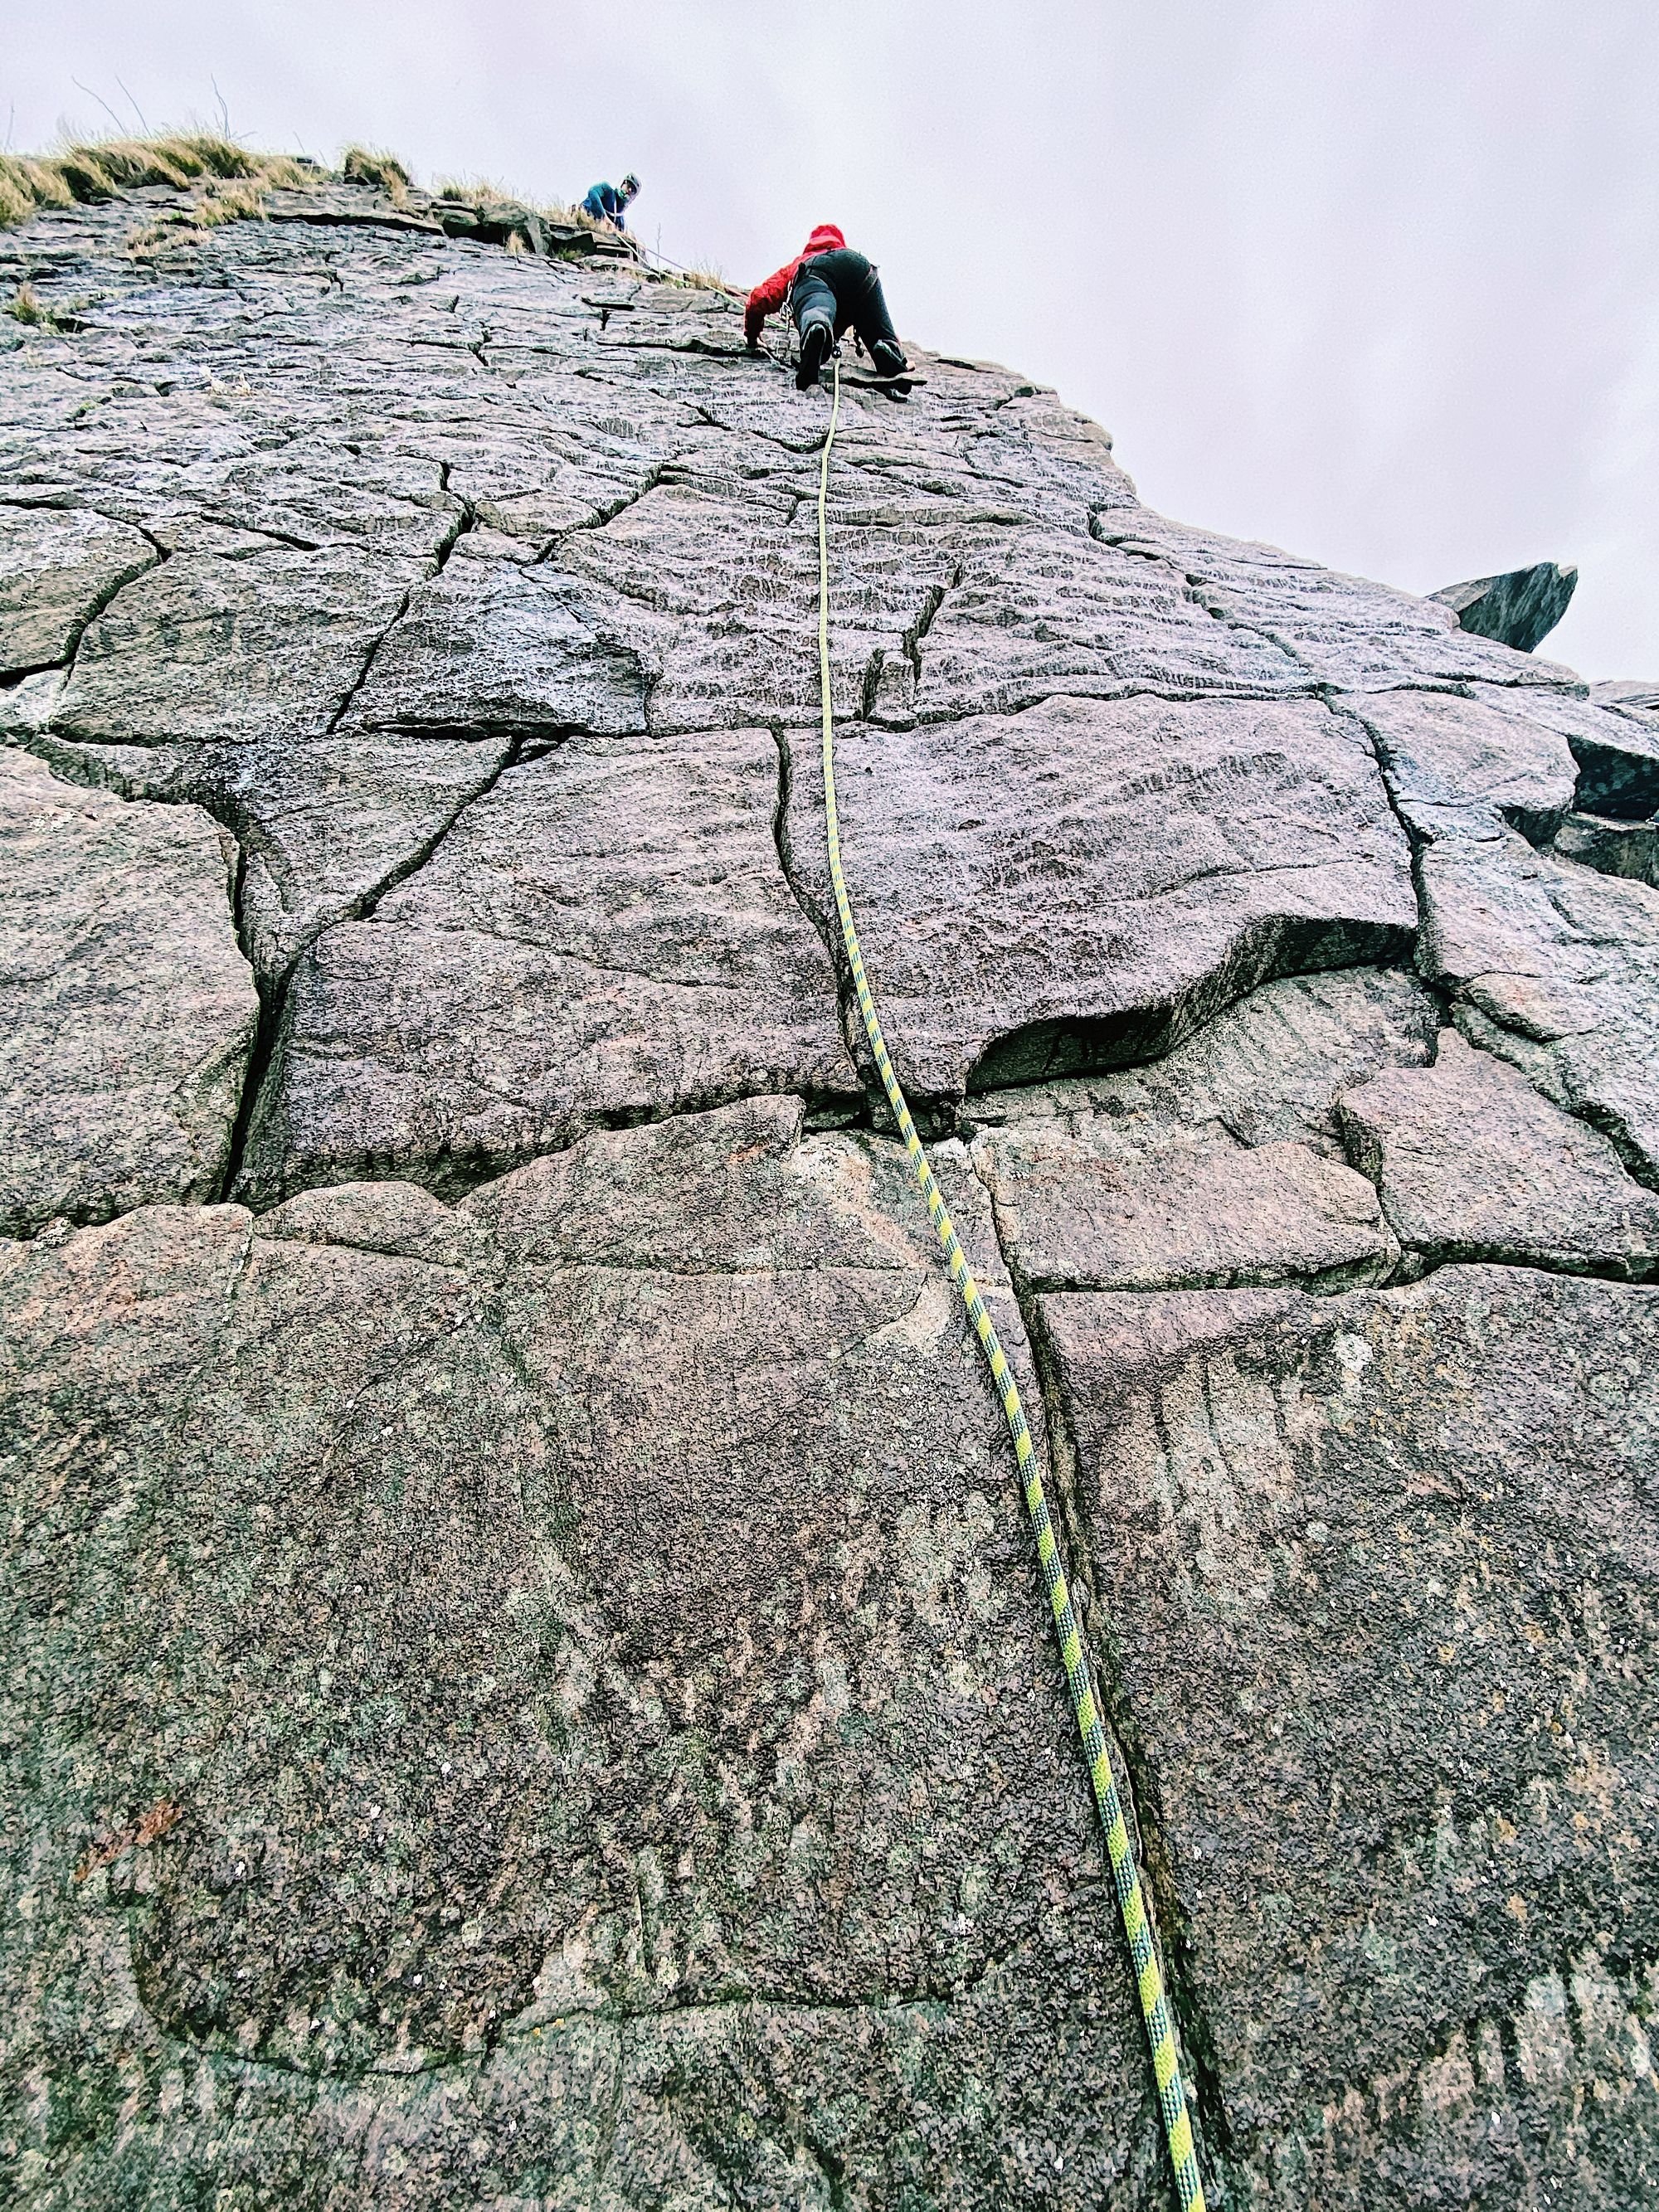 A climber ascends a vertical rock face on the Isle of Skye.